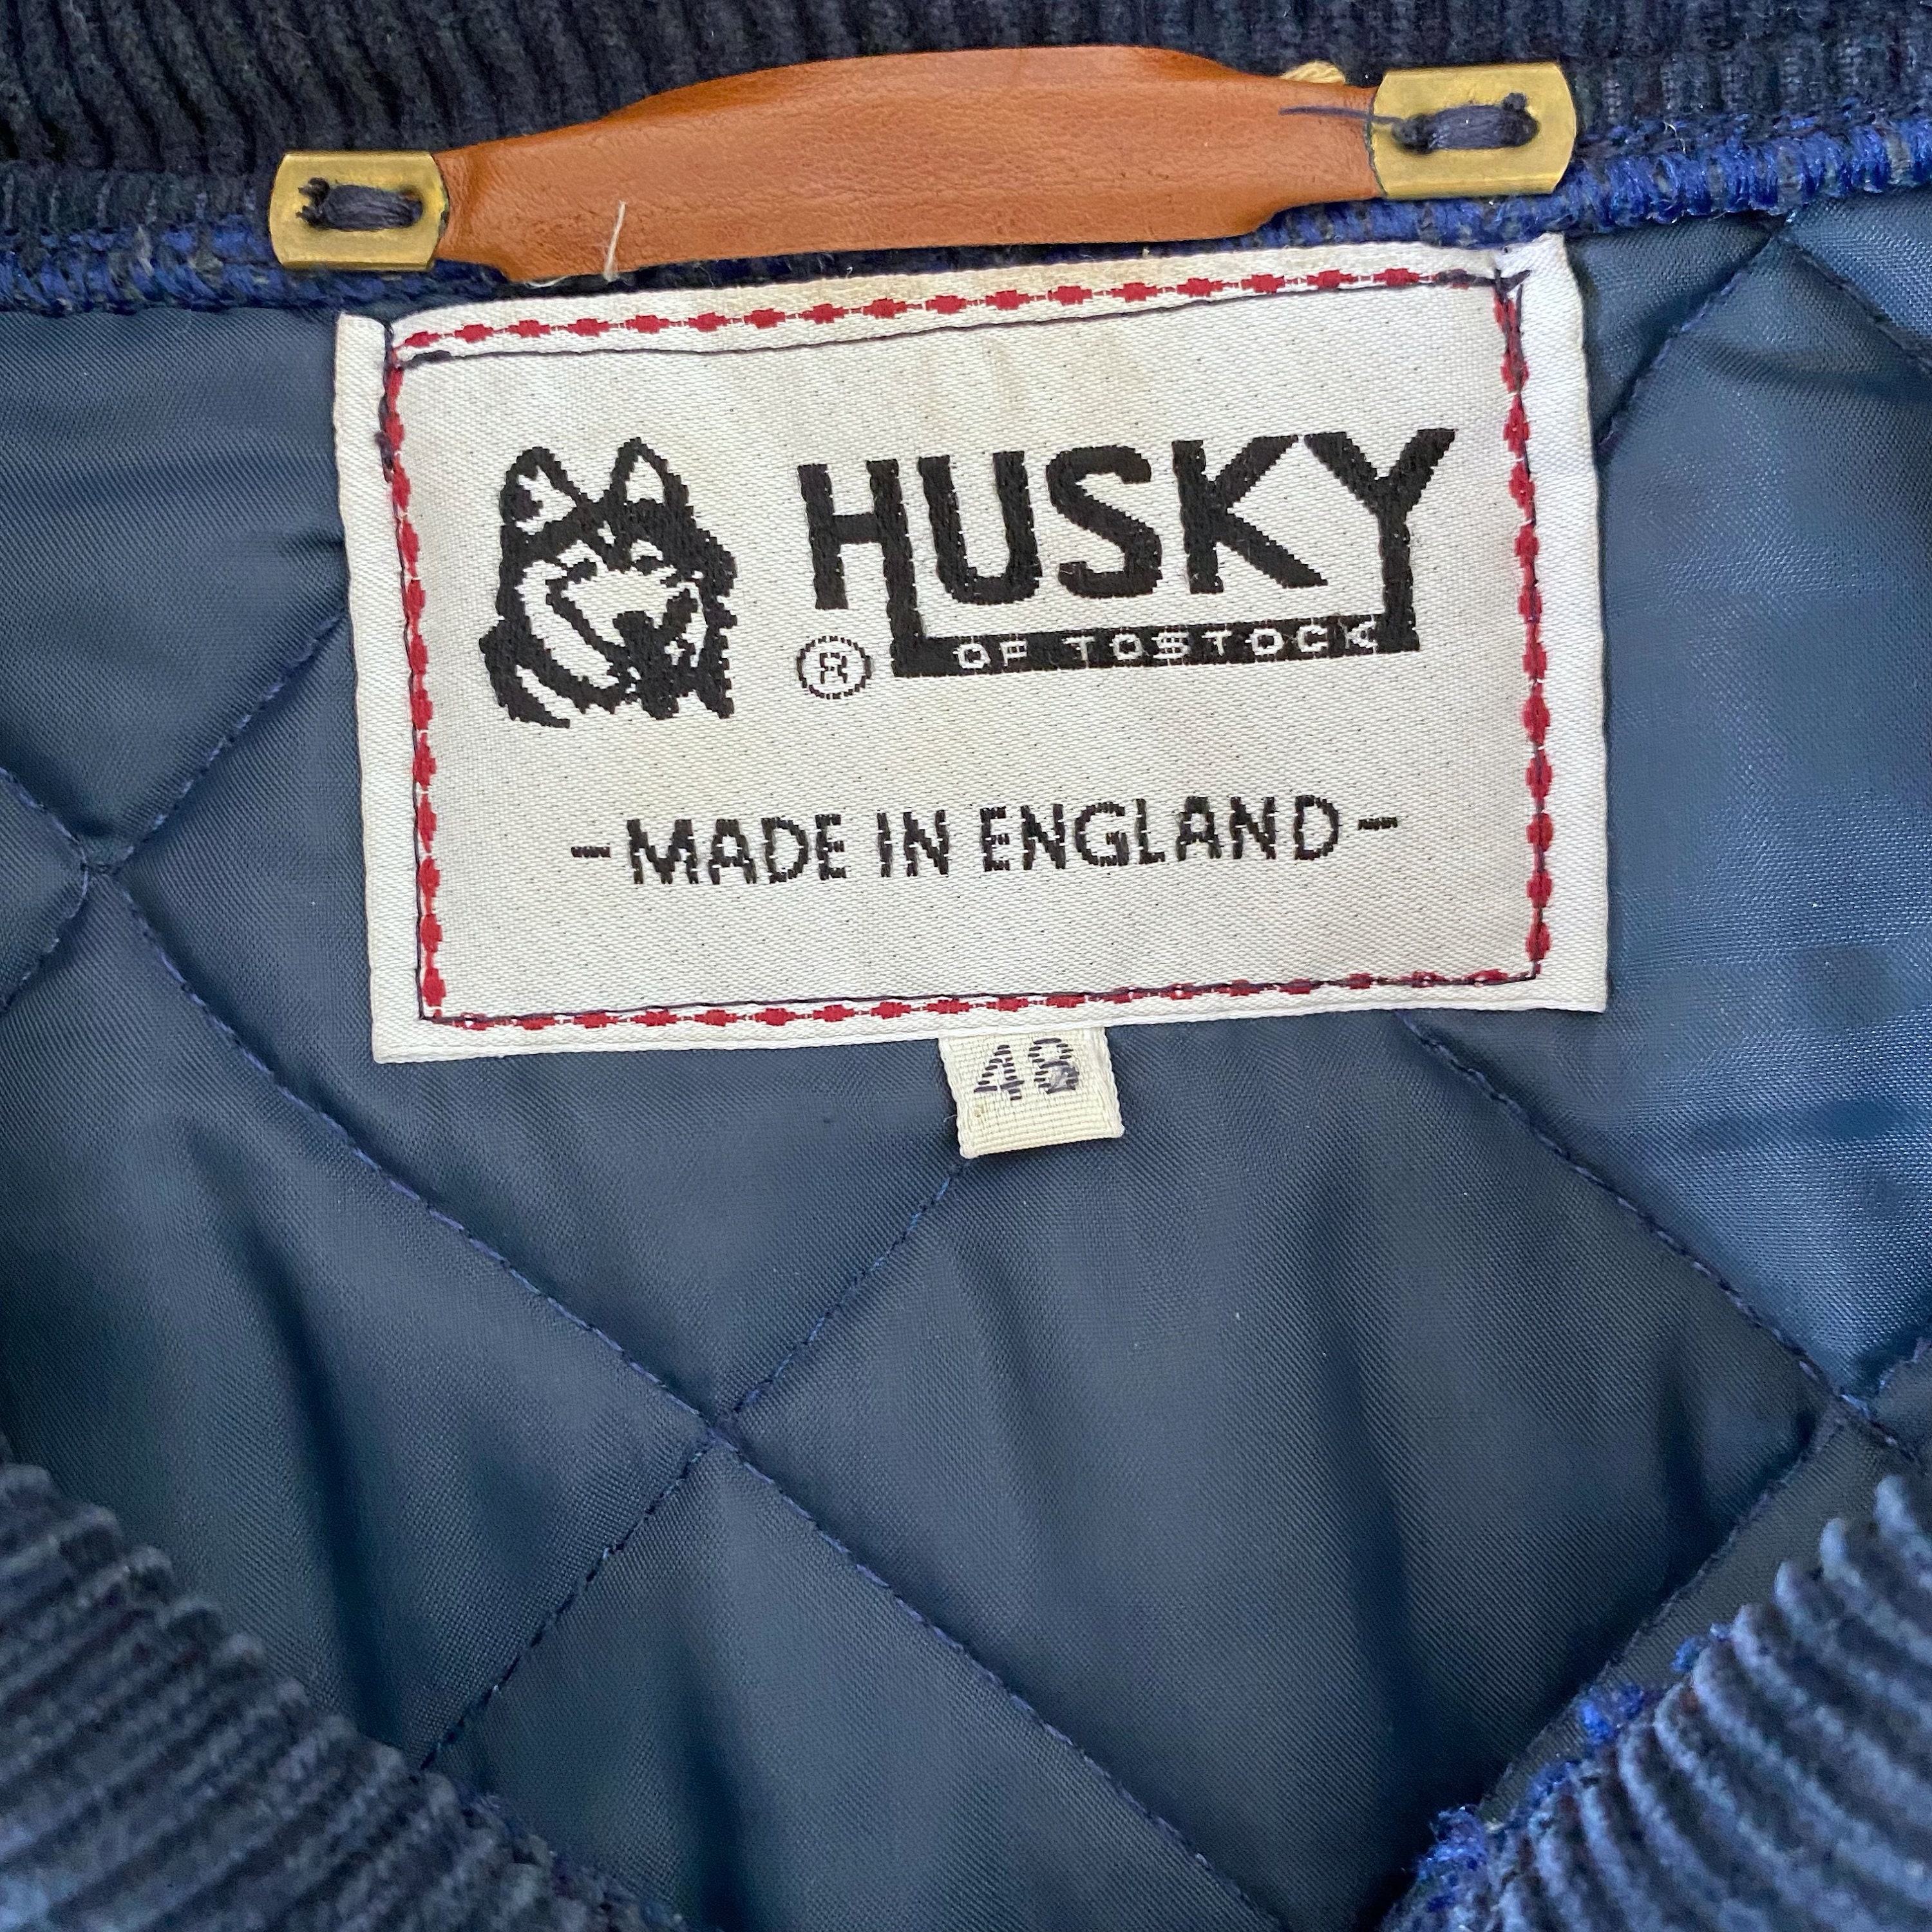 90s vintage HUSKY quilted blue jacket, made in England jacket, blue quilted jacket, vintage quilt jacket, country jacket